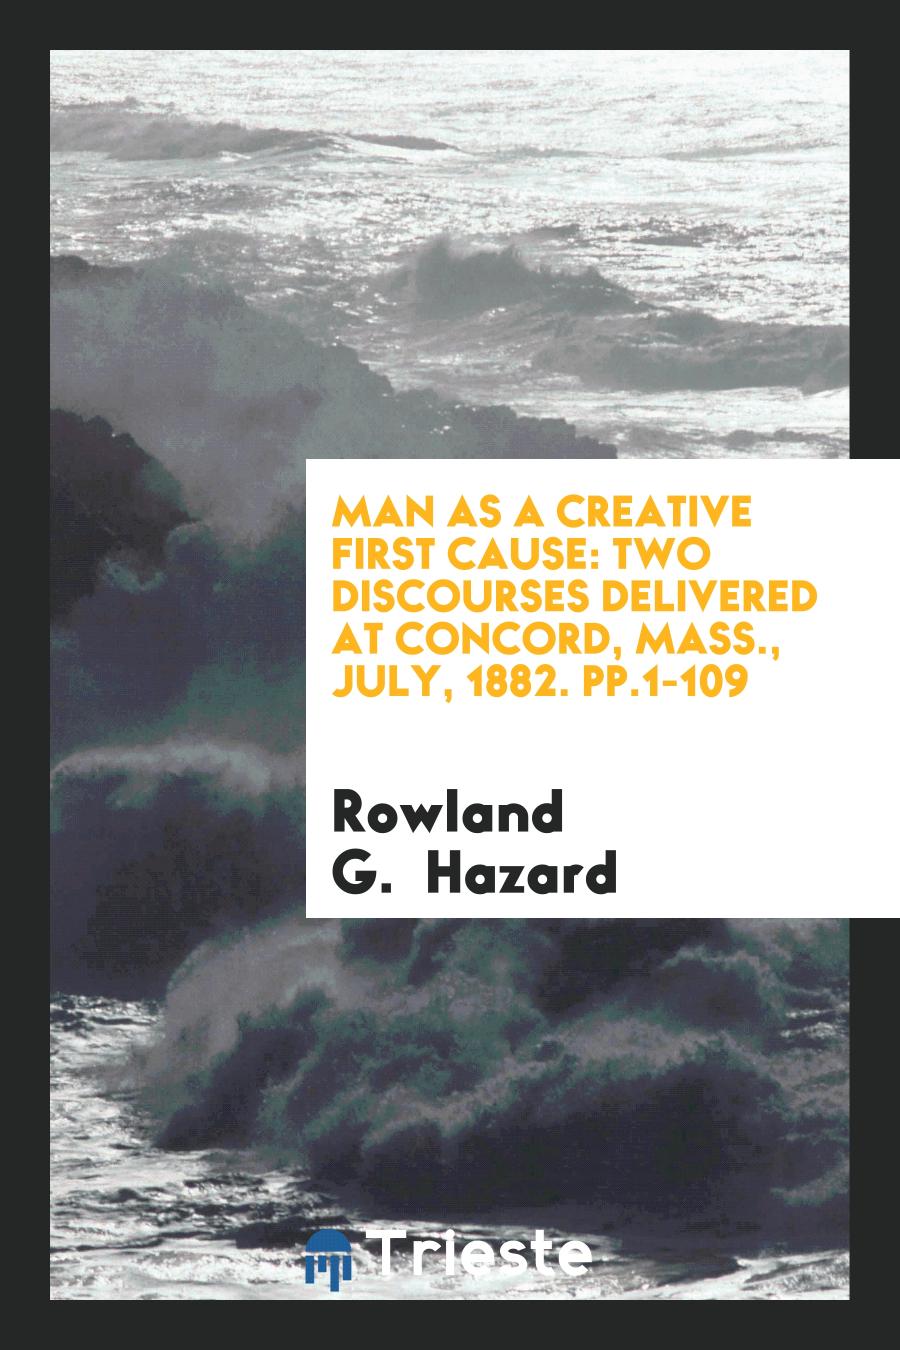 Man as a Creative First Cause: Two Discourses Delivered at Concord, Mass., July, 1882. Pp.1-109